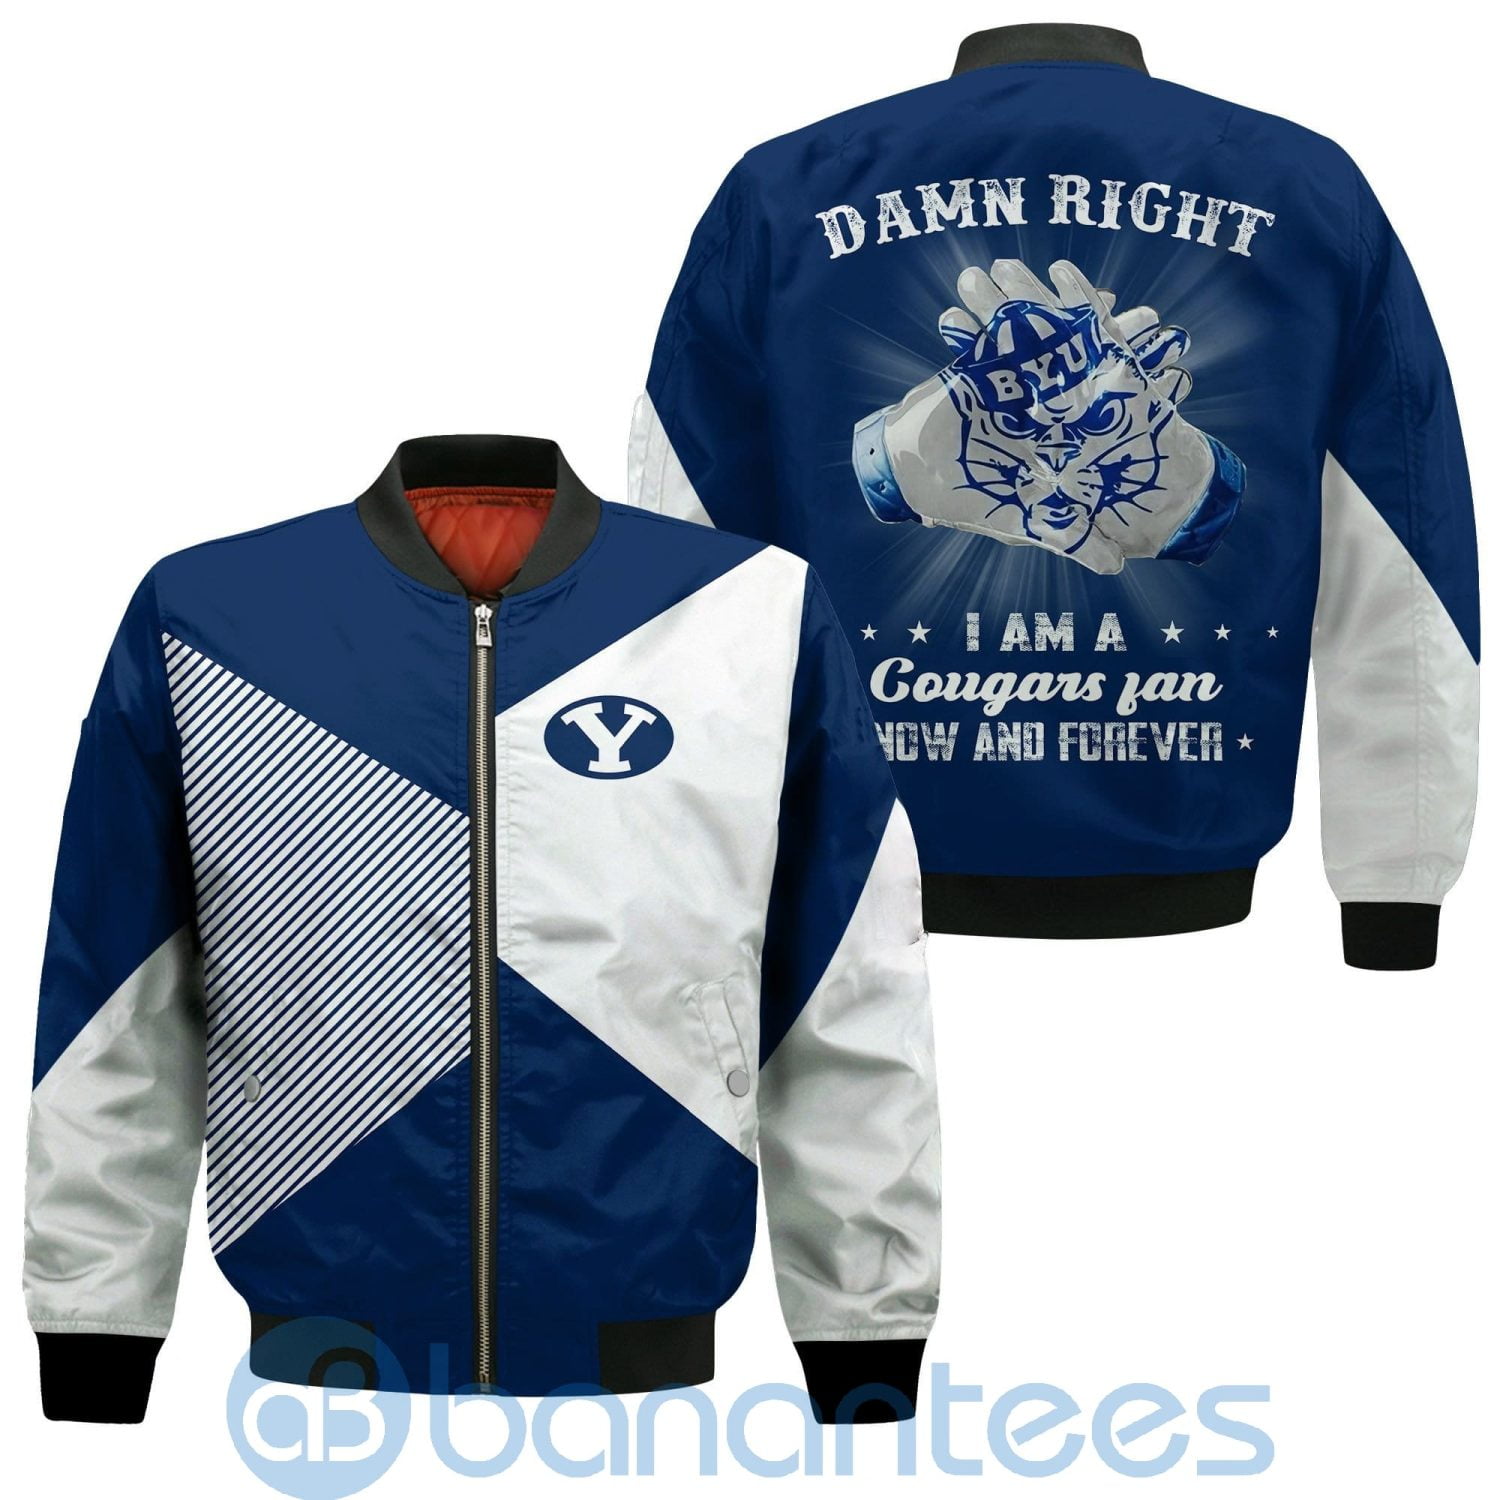 BYU Cougars Damn Right I Am Cougars Fan Now And Forever Bomber Jacket